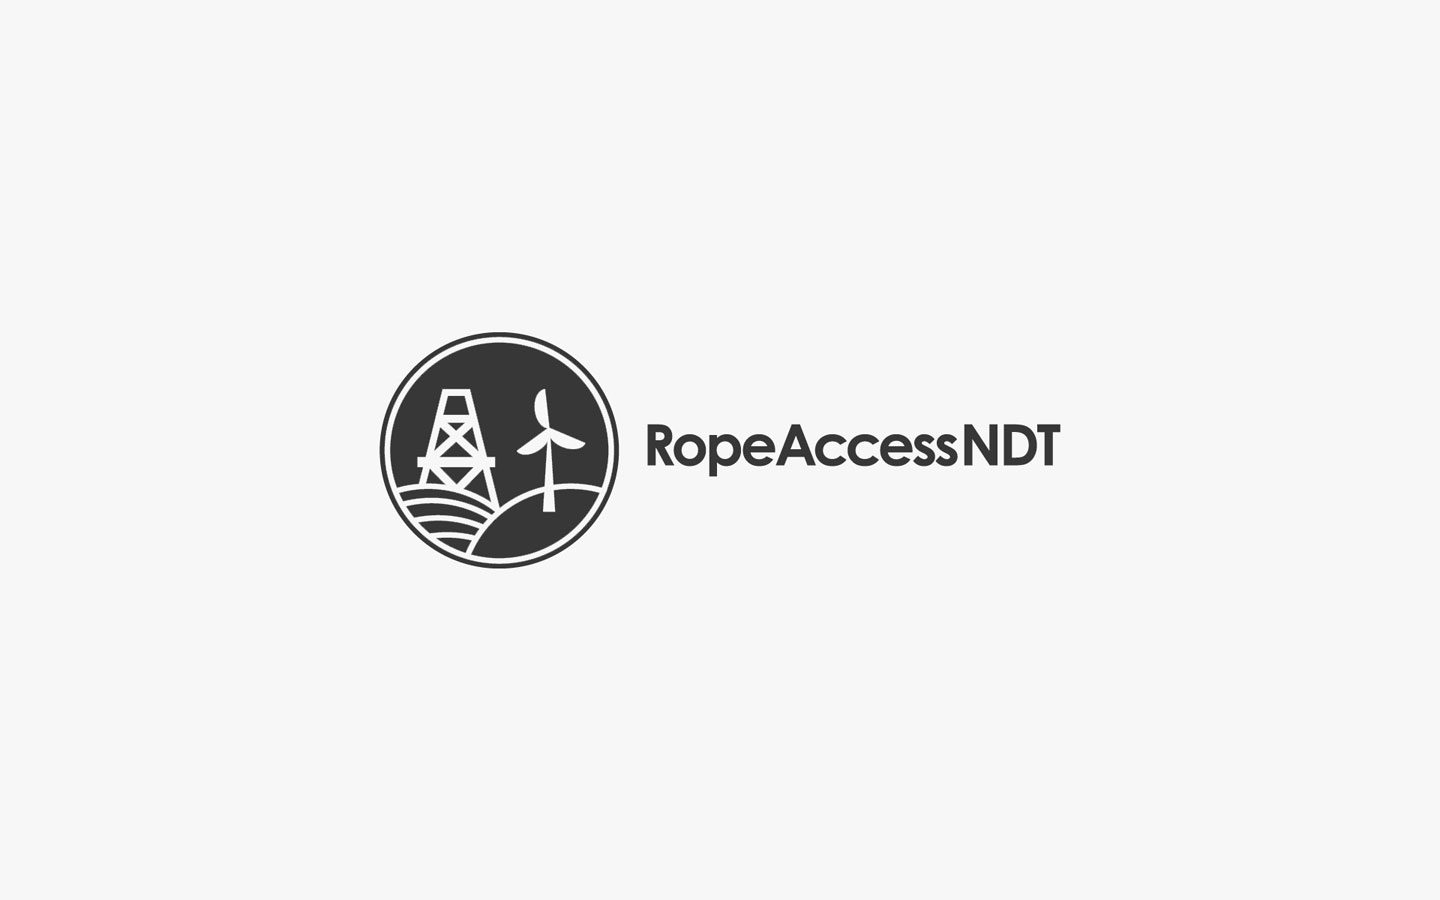 Rope Access NDT, Logo Design in Mono